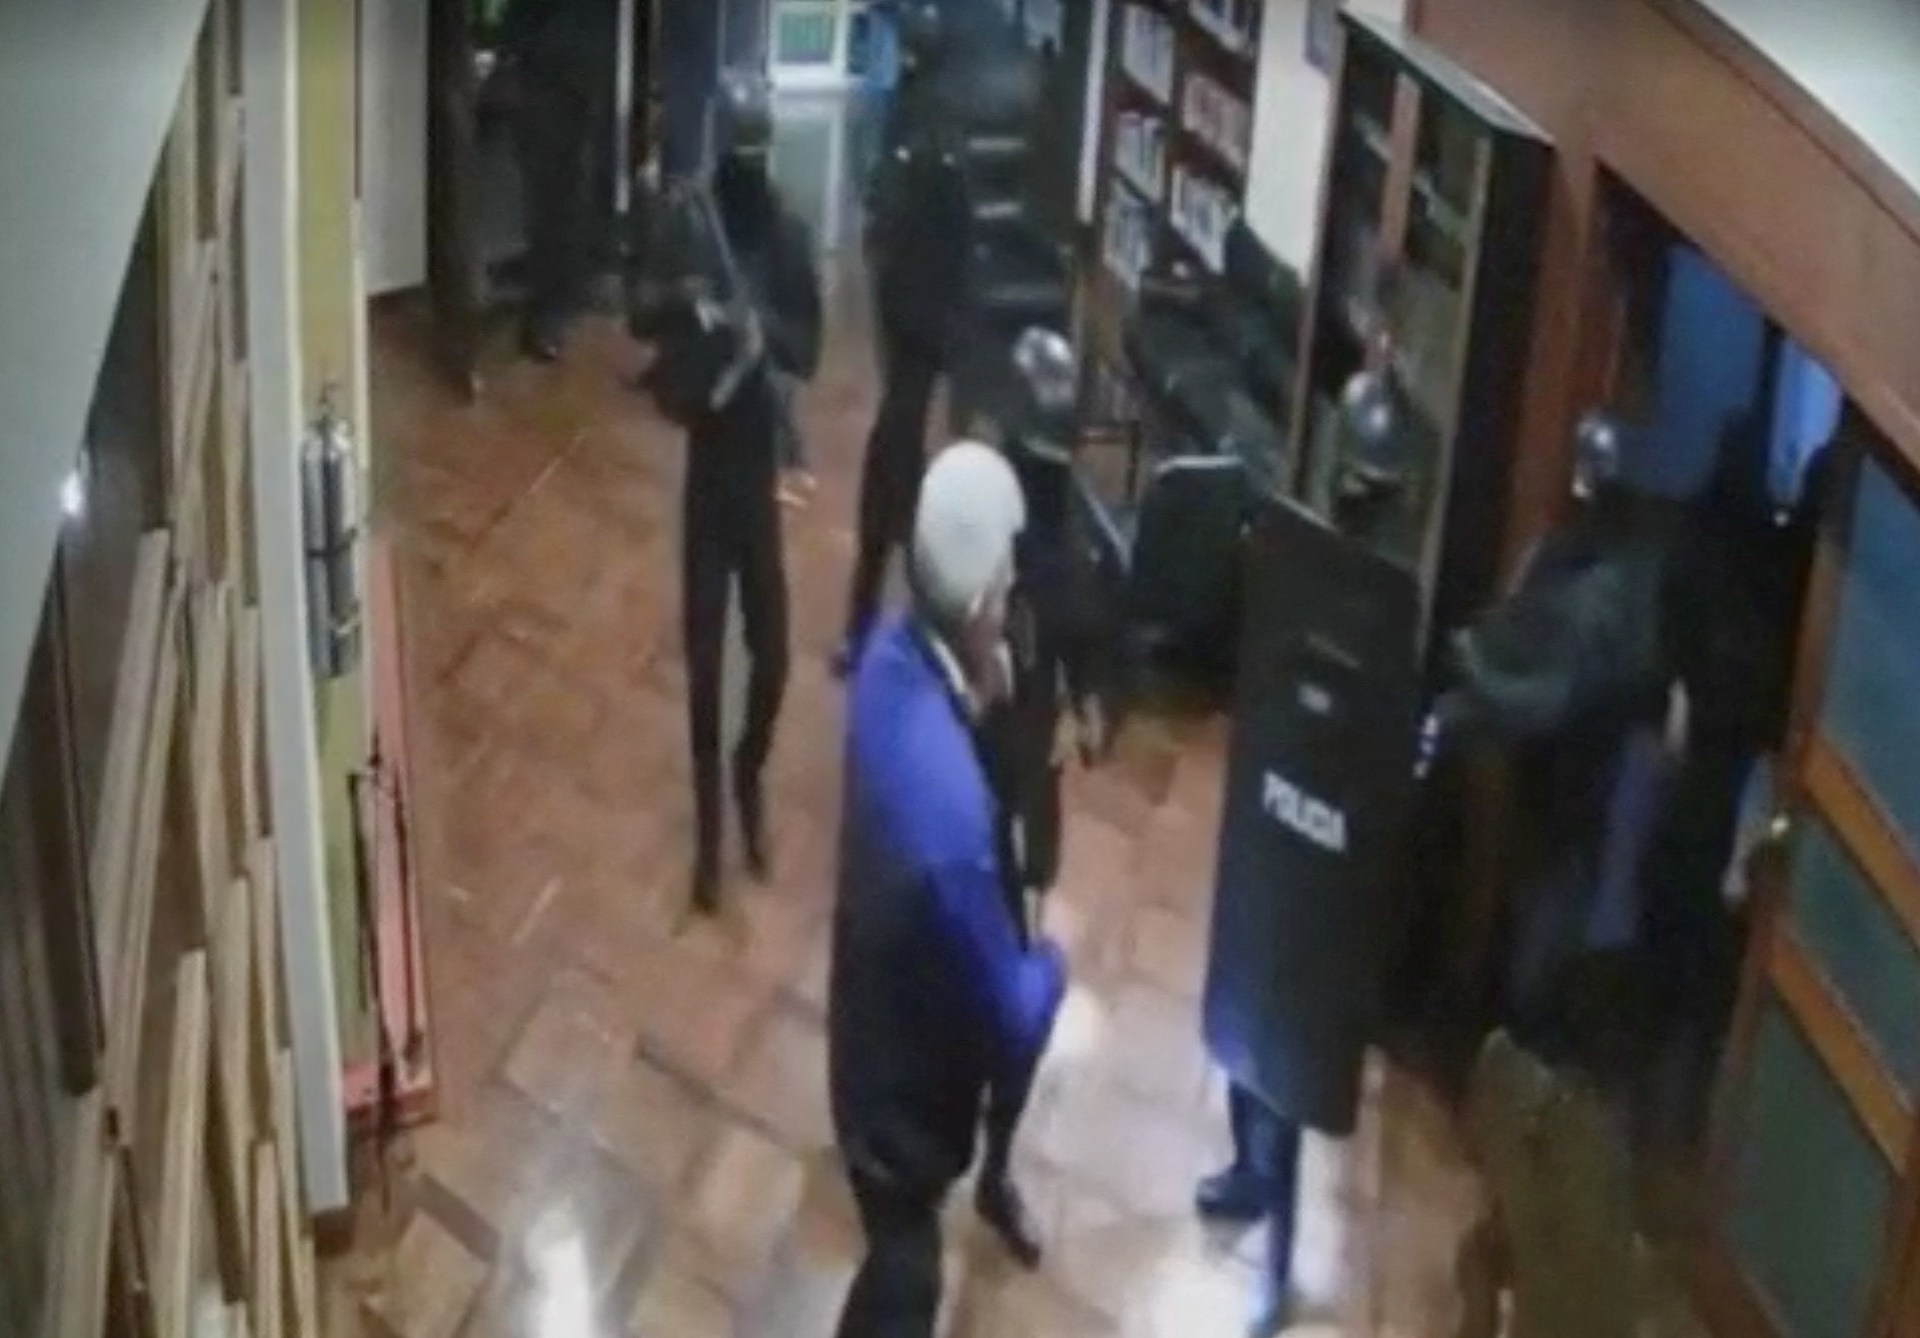 Mexico releases footage of Ecuador police storming its embassy